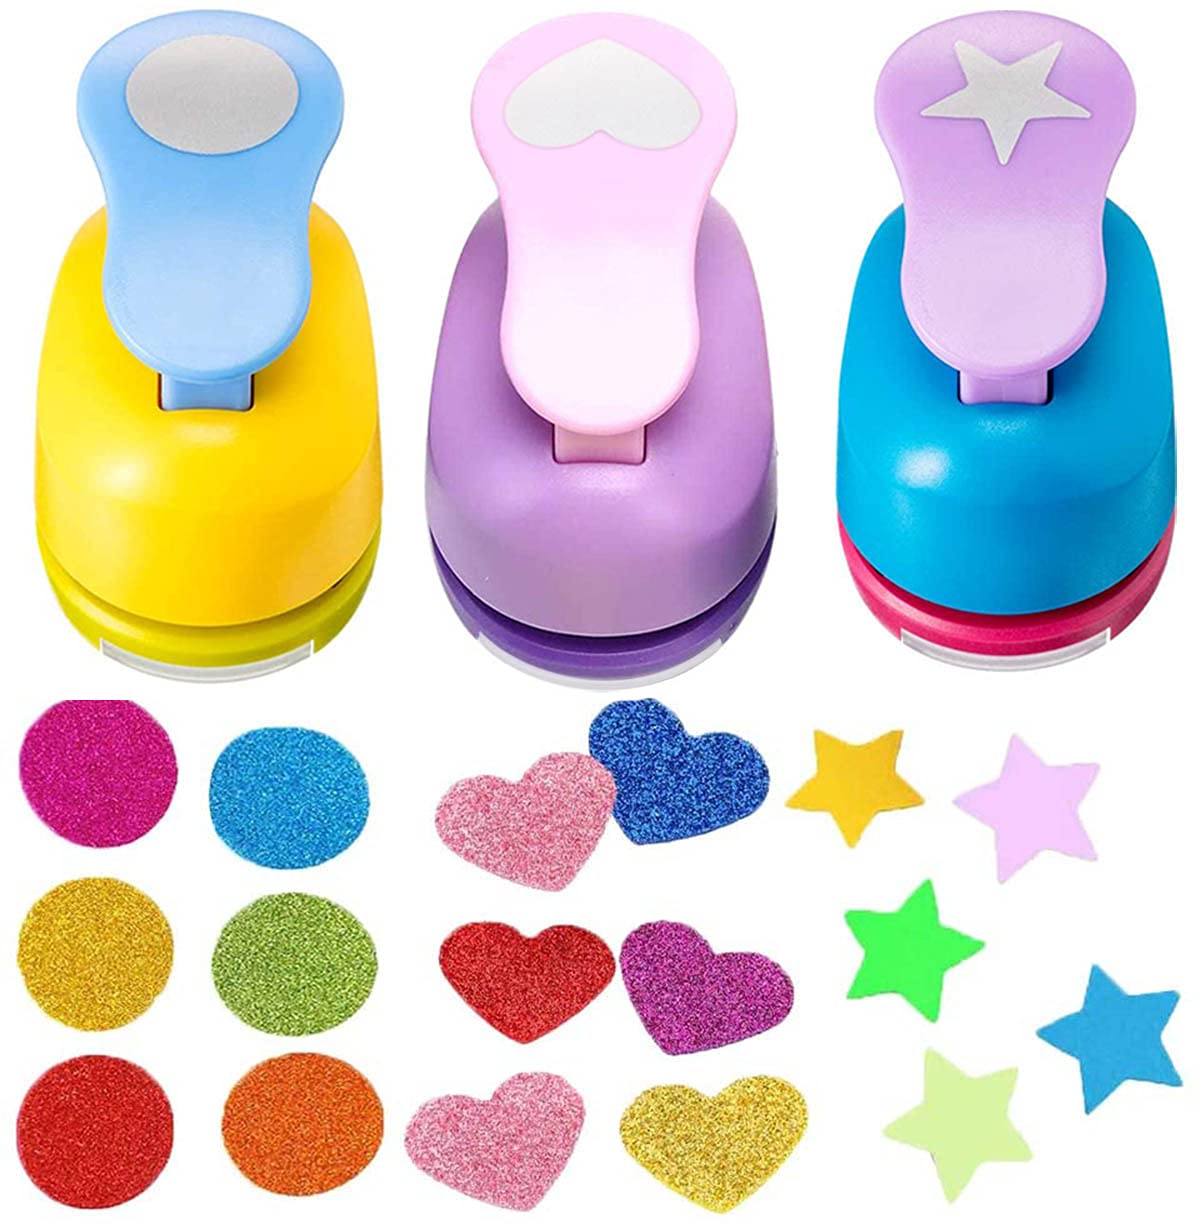 0.6/1 Inch Star Punch, Star Hole Paper Punch Hole Puncher Shape Punches